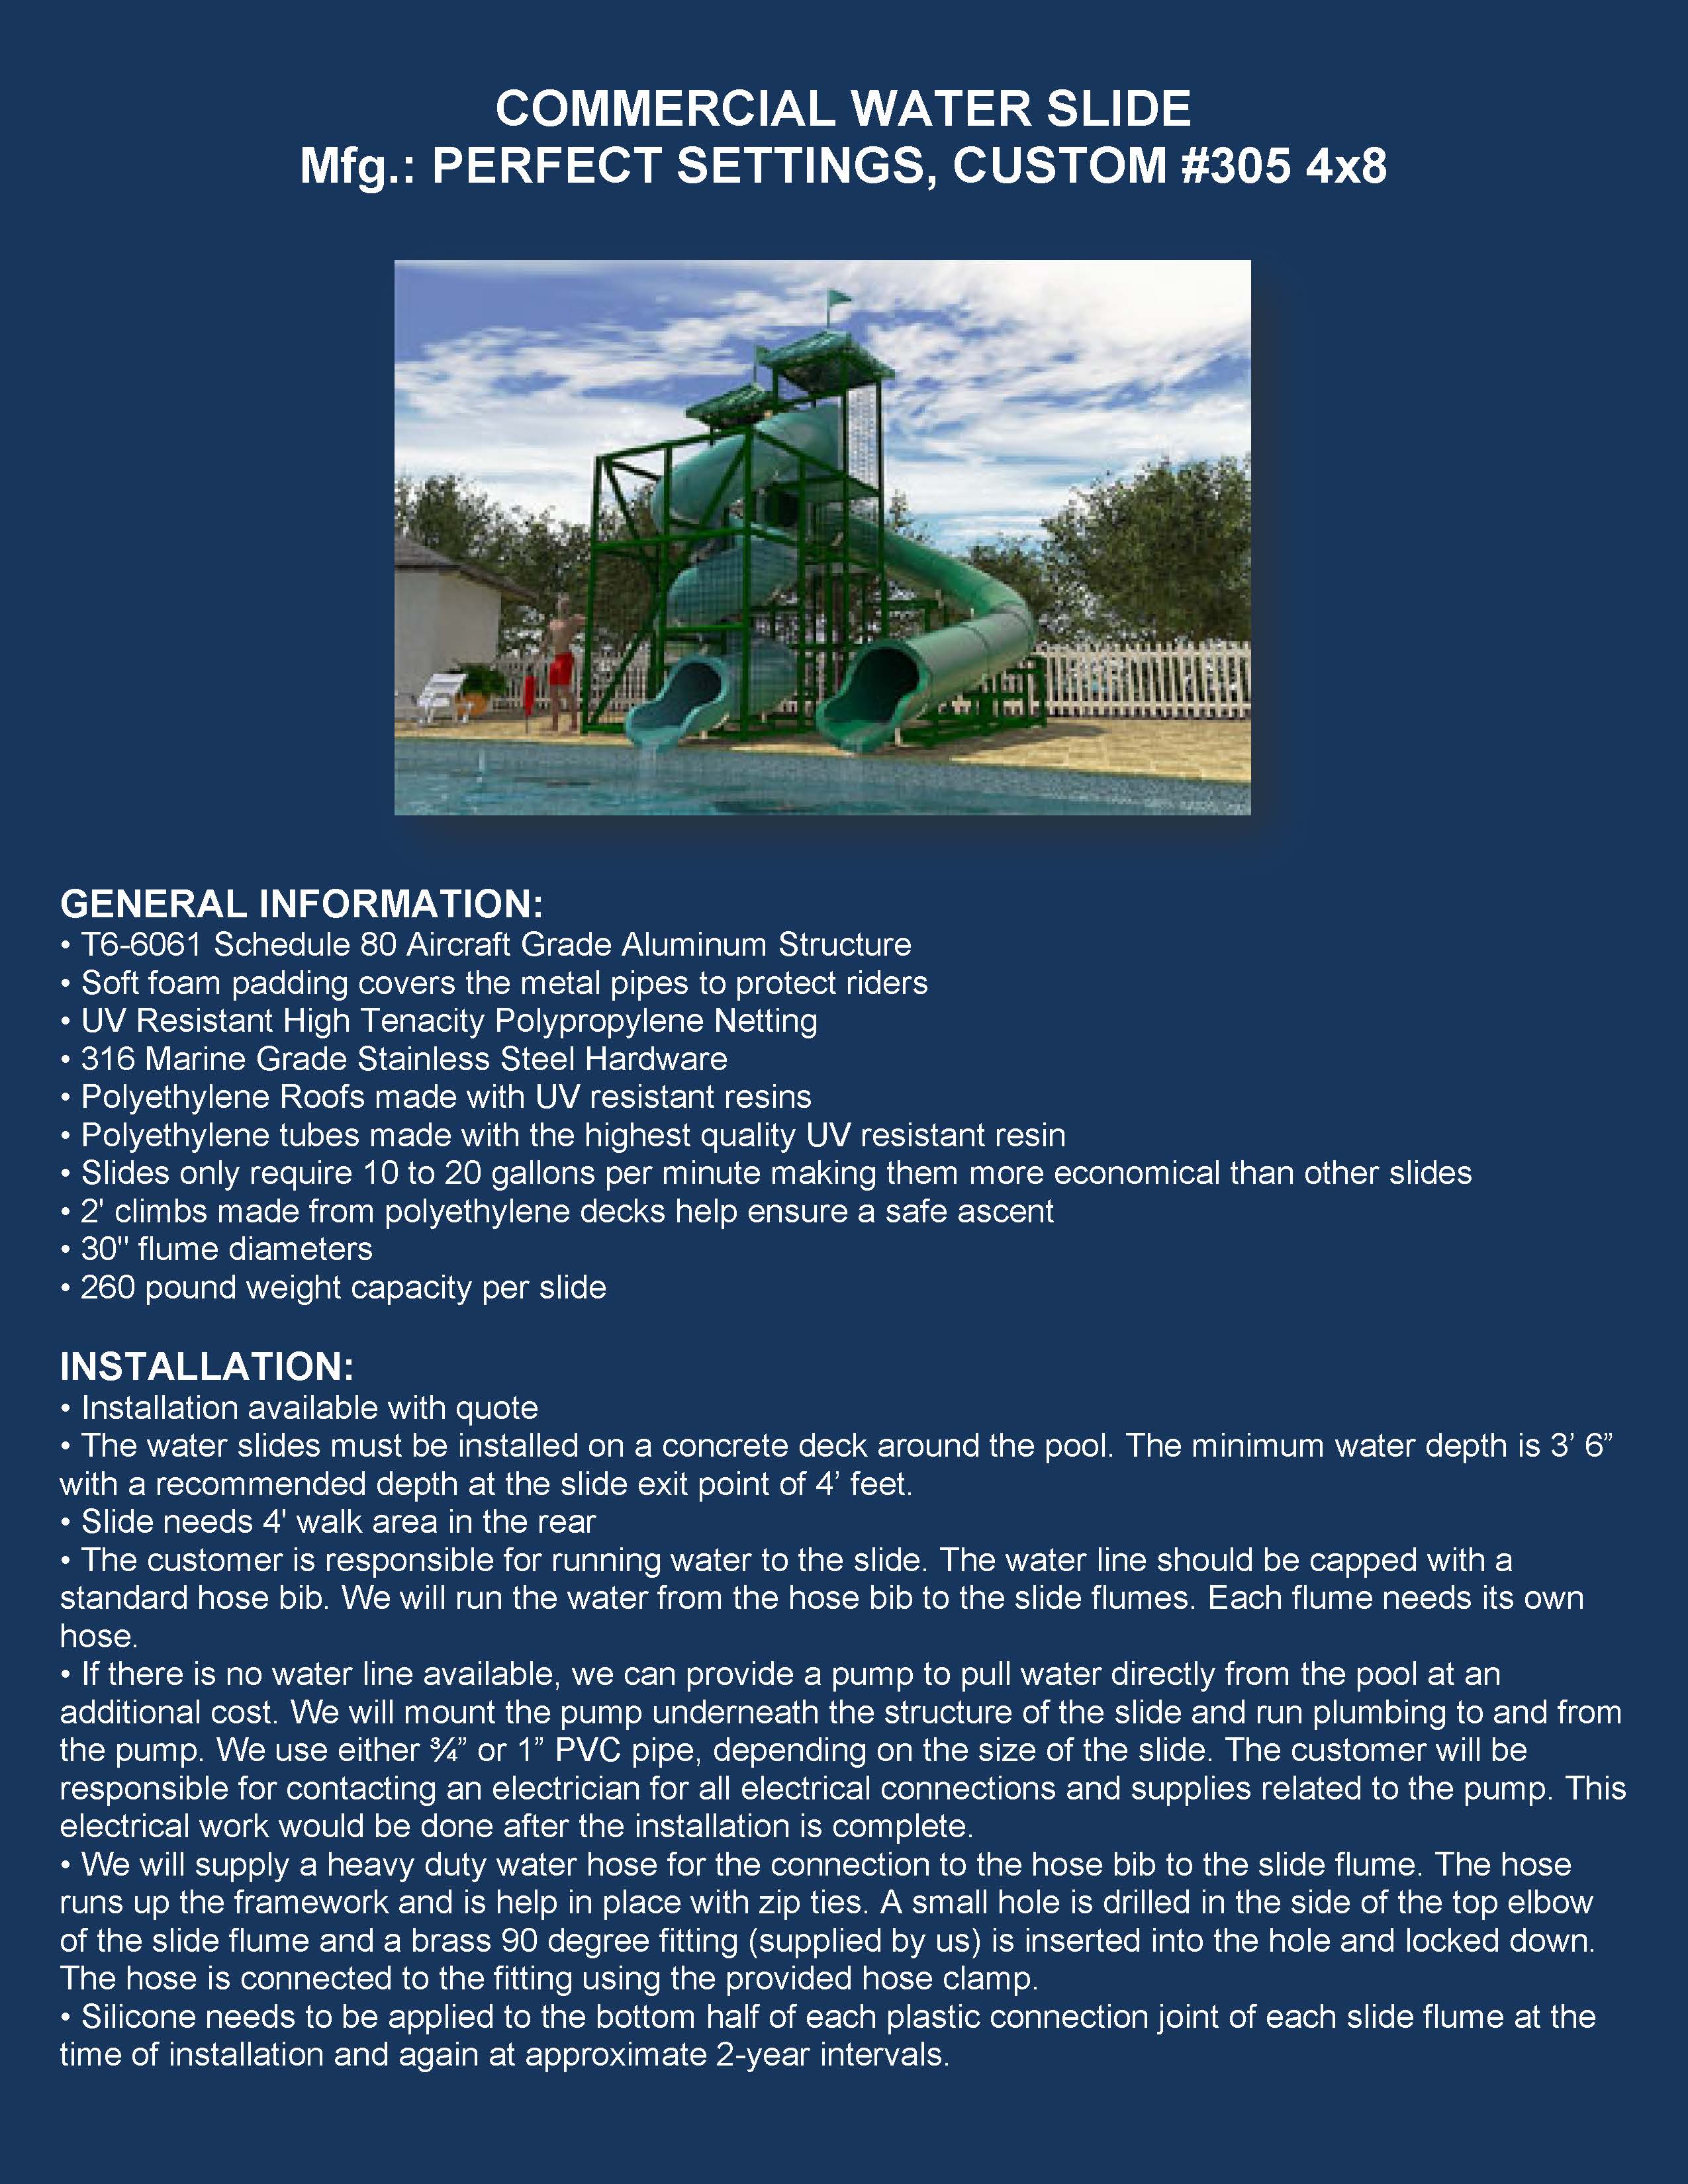 Commercial Water Slide #205 4X8